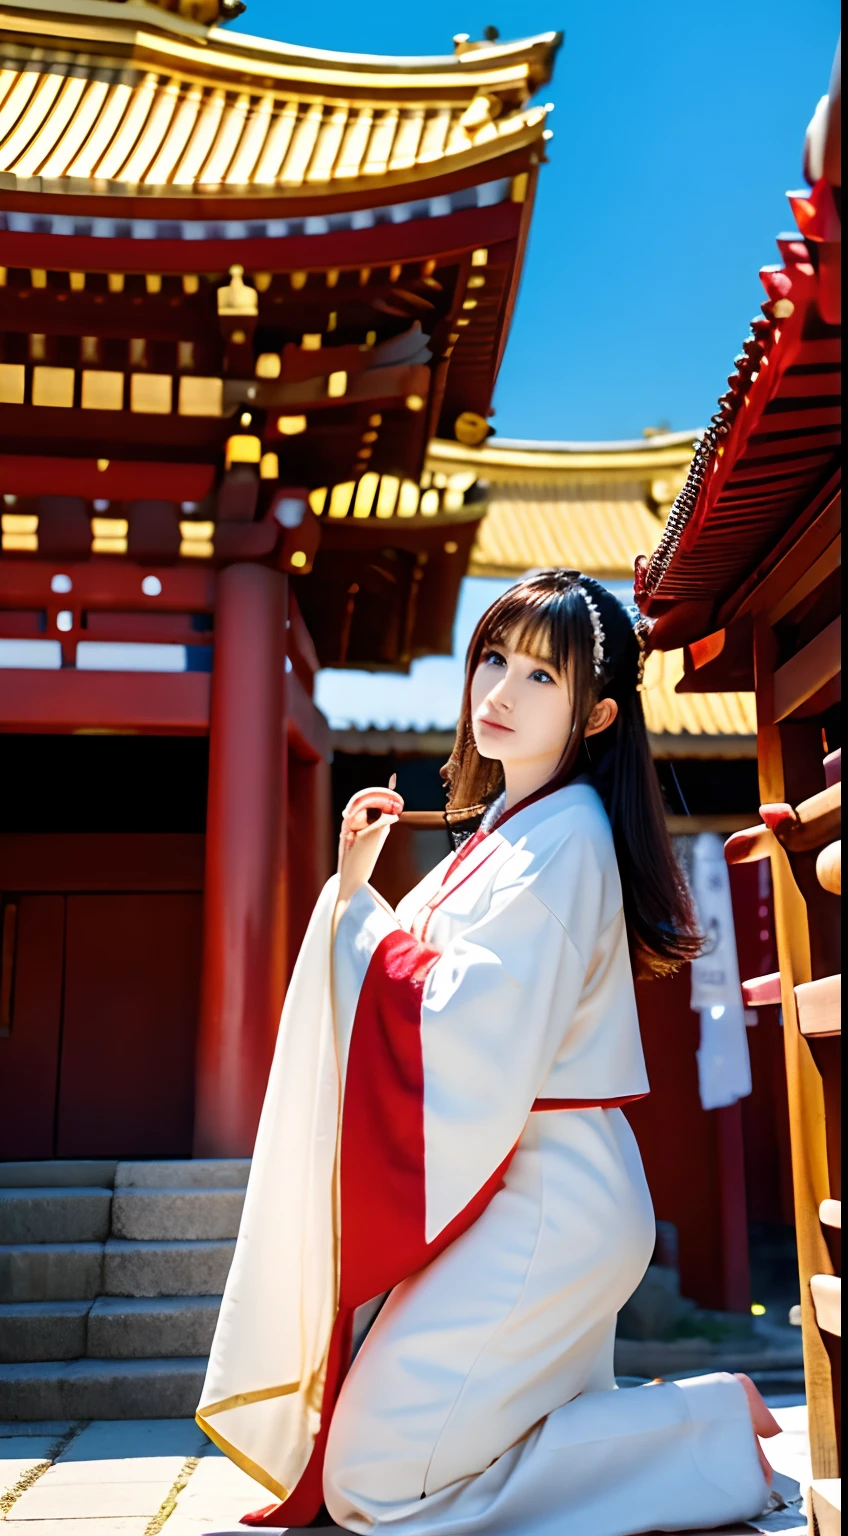 Shrine priestess,fullbody image,high resolution images,fullbody image,Best Quality, masutepiece,Gold eyes,White and red priestess figure,fullbody image,Looking Up, full bodyesbian,Strands of hair,Background torii gate in the middle of the temple grounds,fullbody image,（Beautiful face)